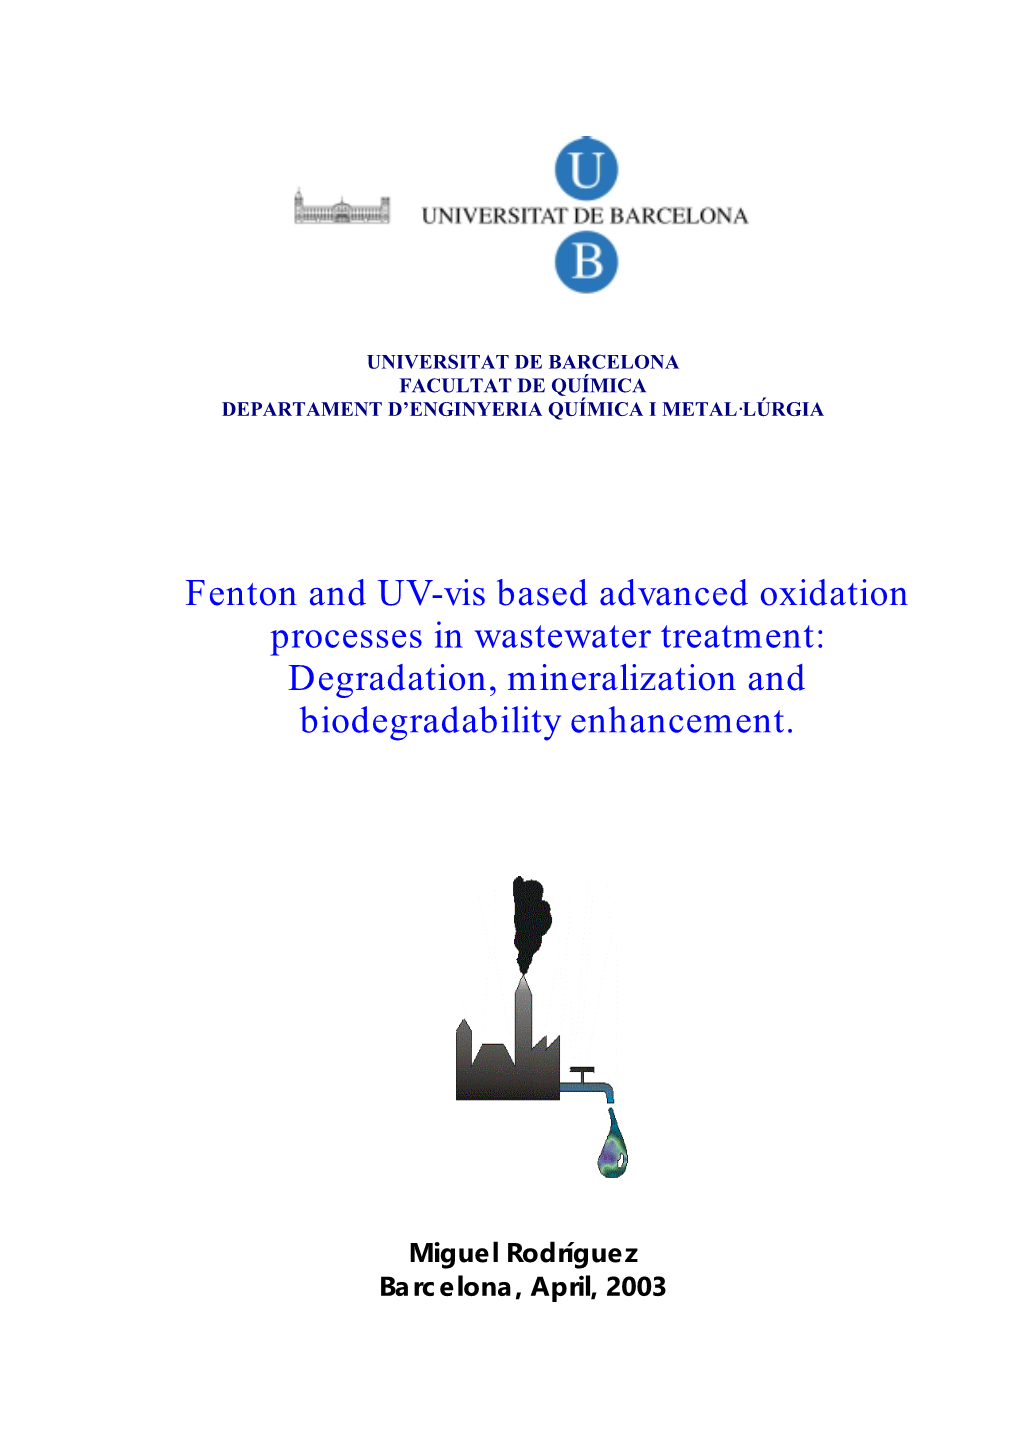 Fenton and UV-Vis Based Advanced Oxidation Processes in Wastewater Treatment